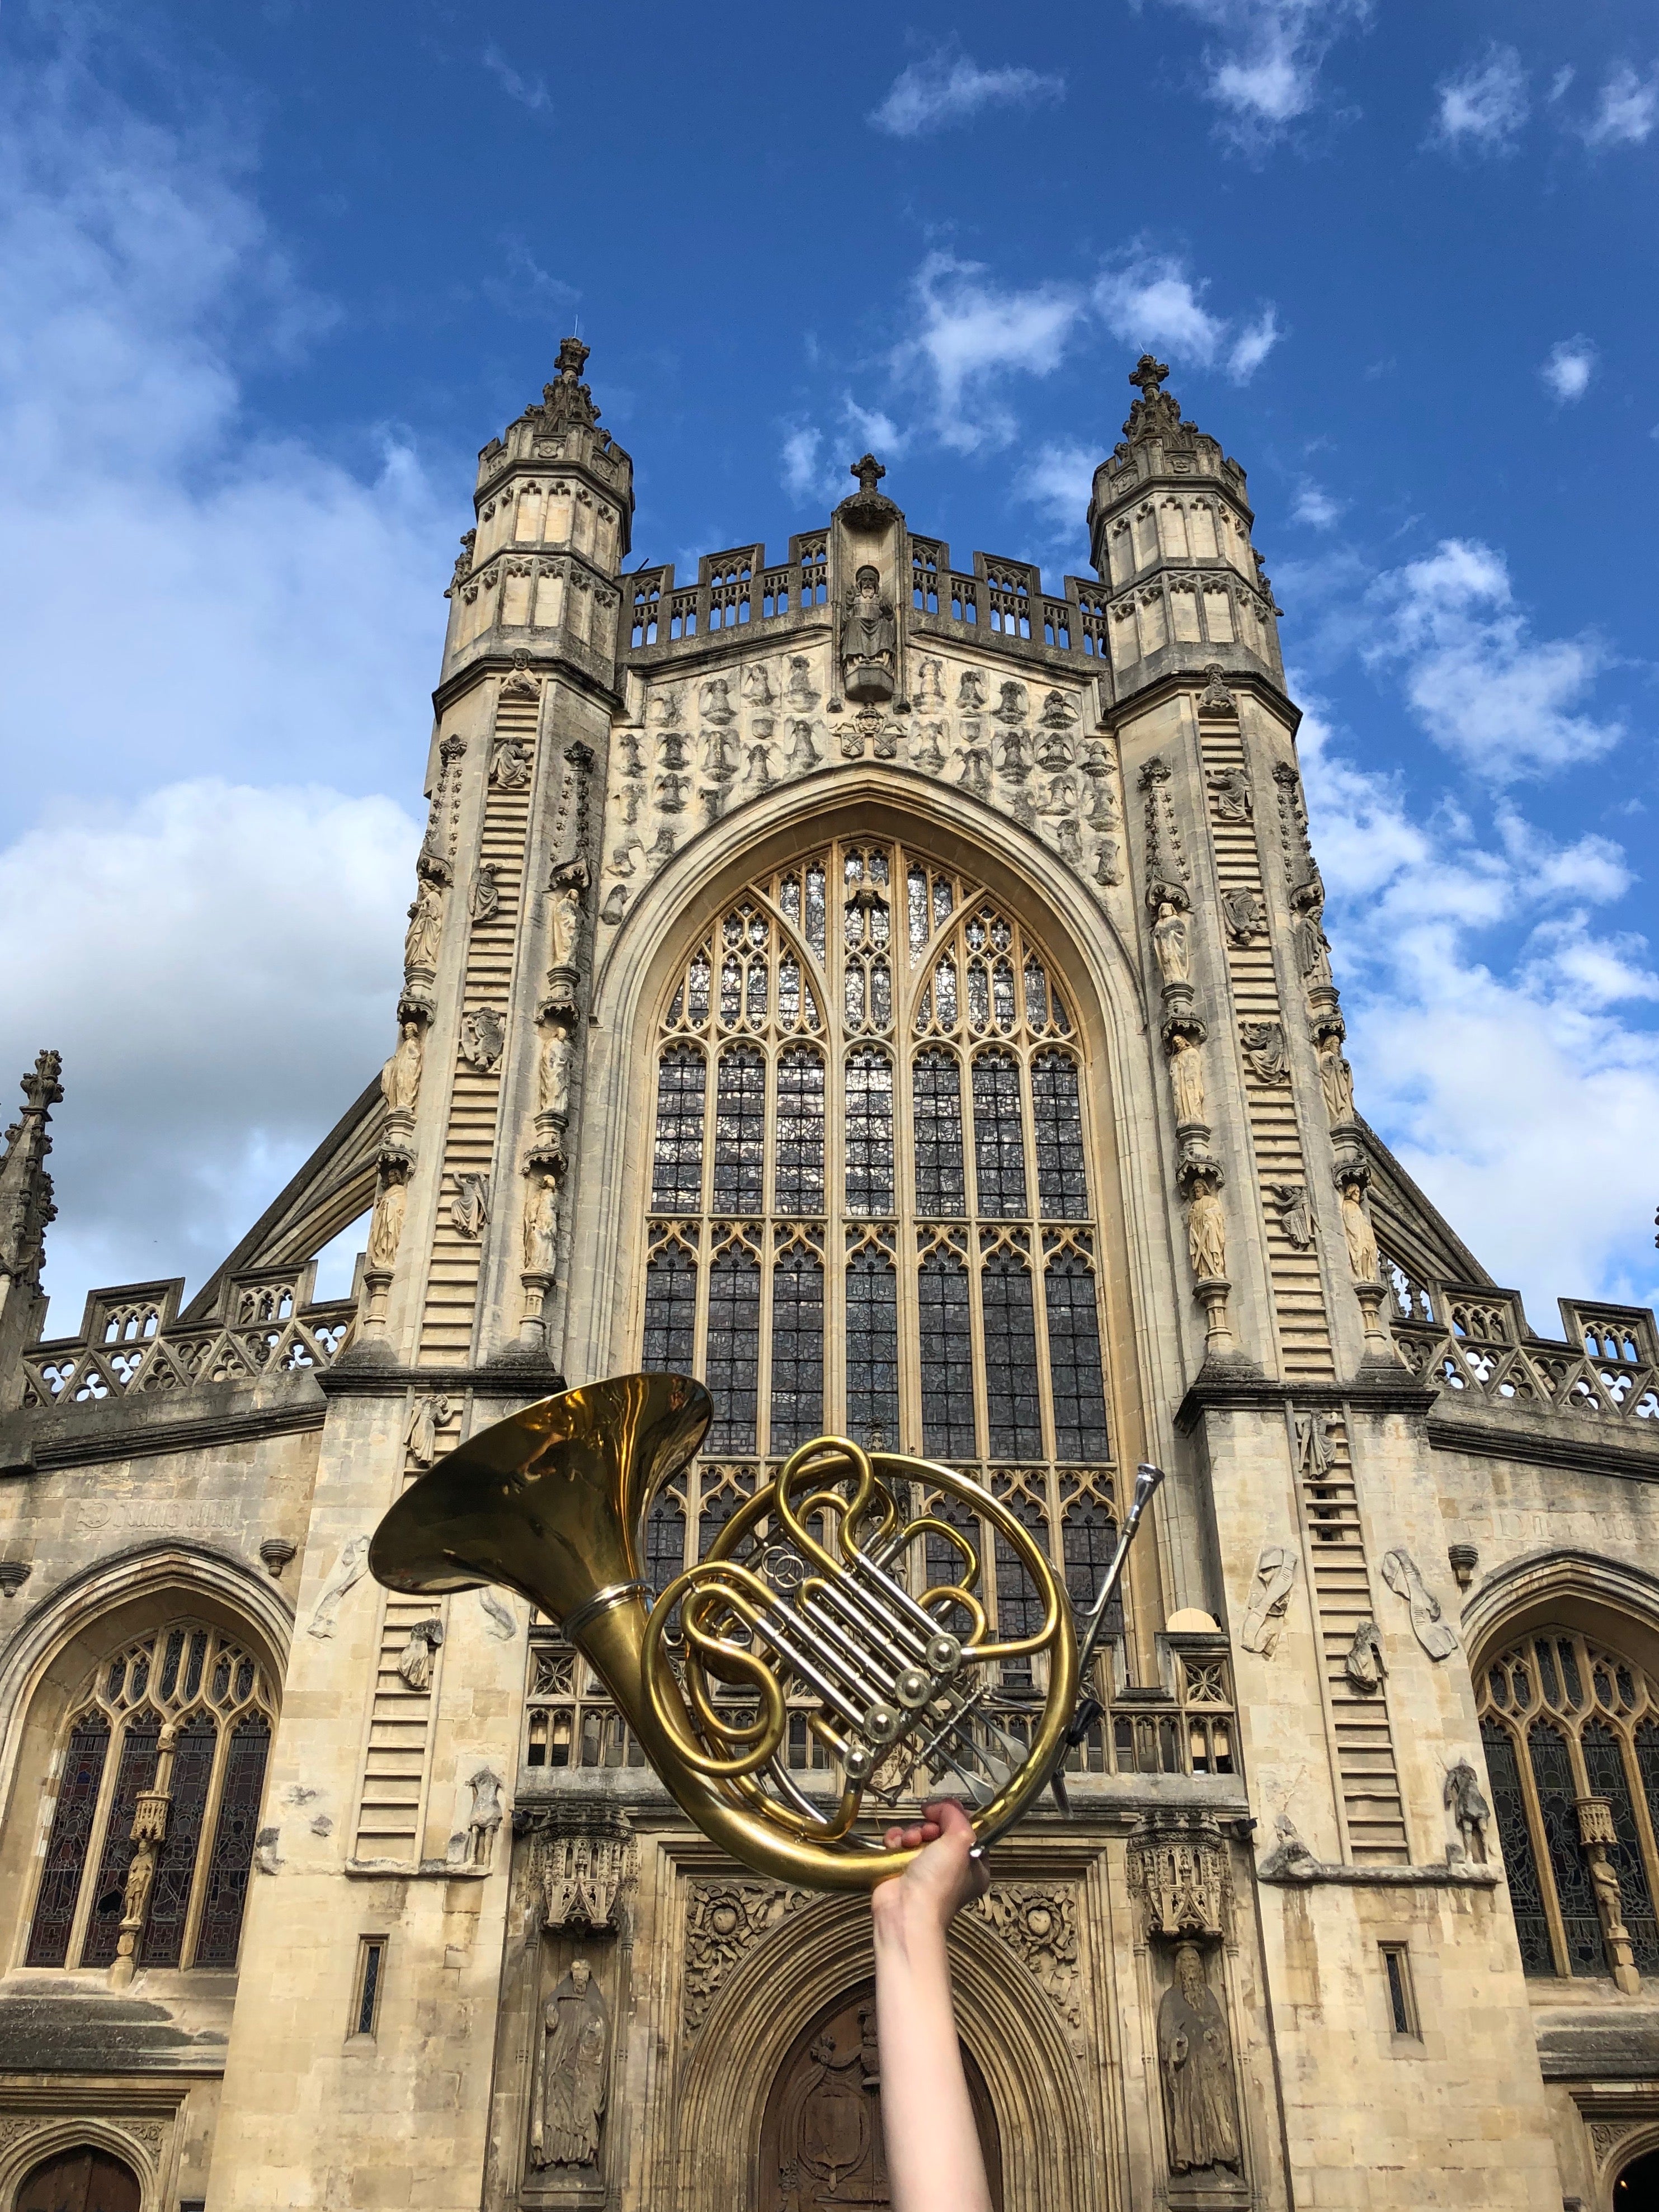  A French horn in front of the abbey. The horn is held up by a person out of the frame.